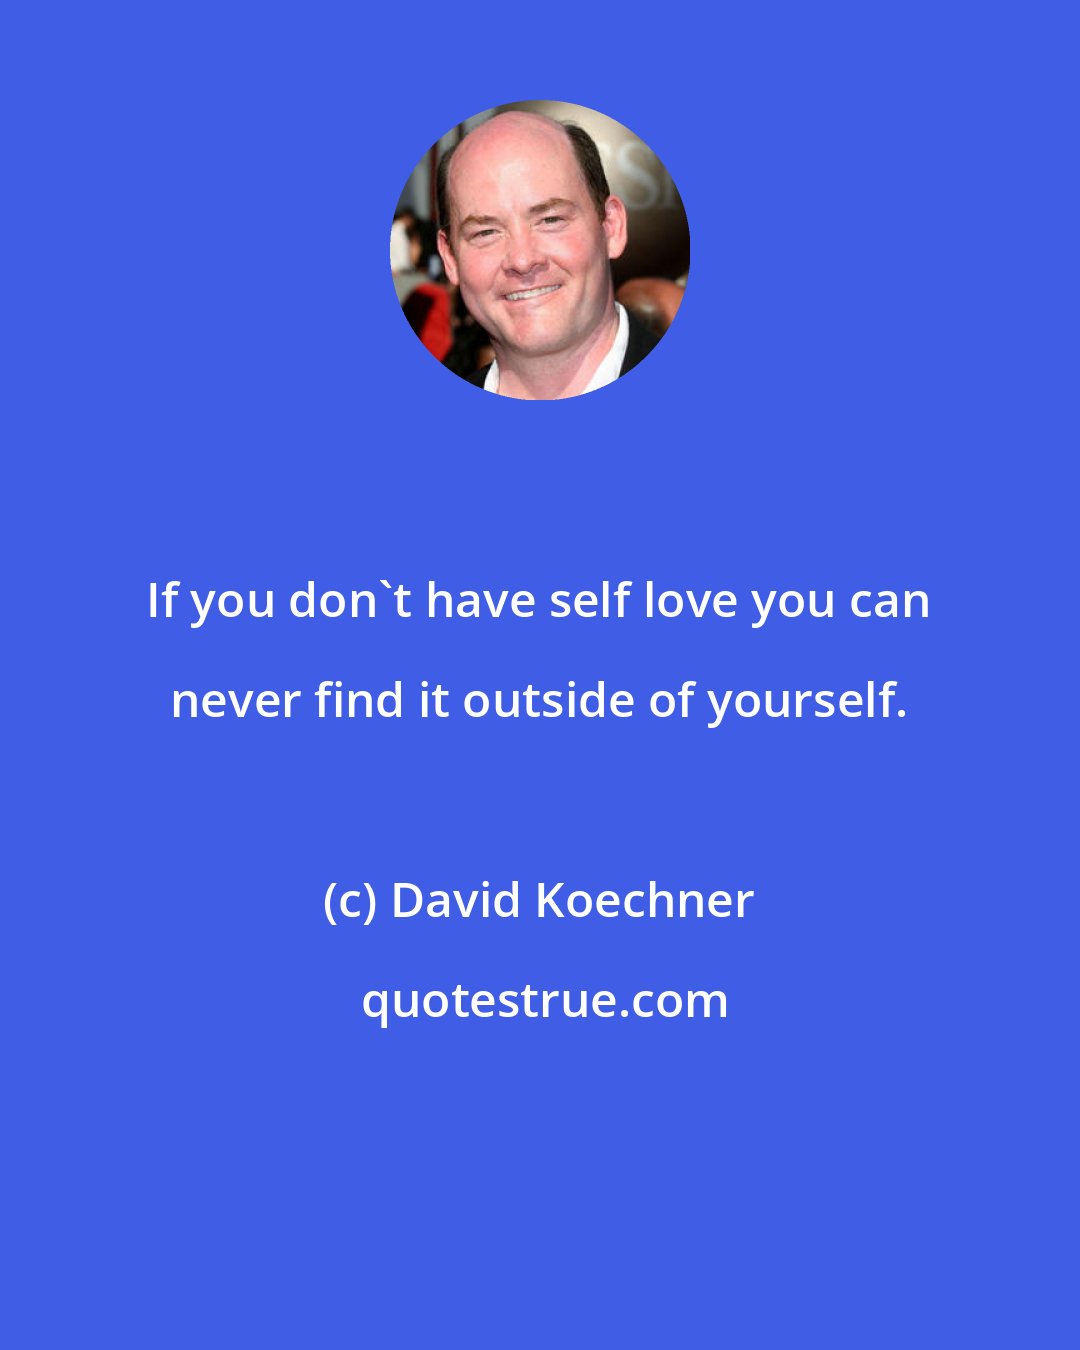 David Koechner: If you don't have self love you can never find it outside of yourself.